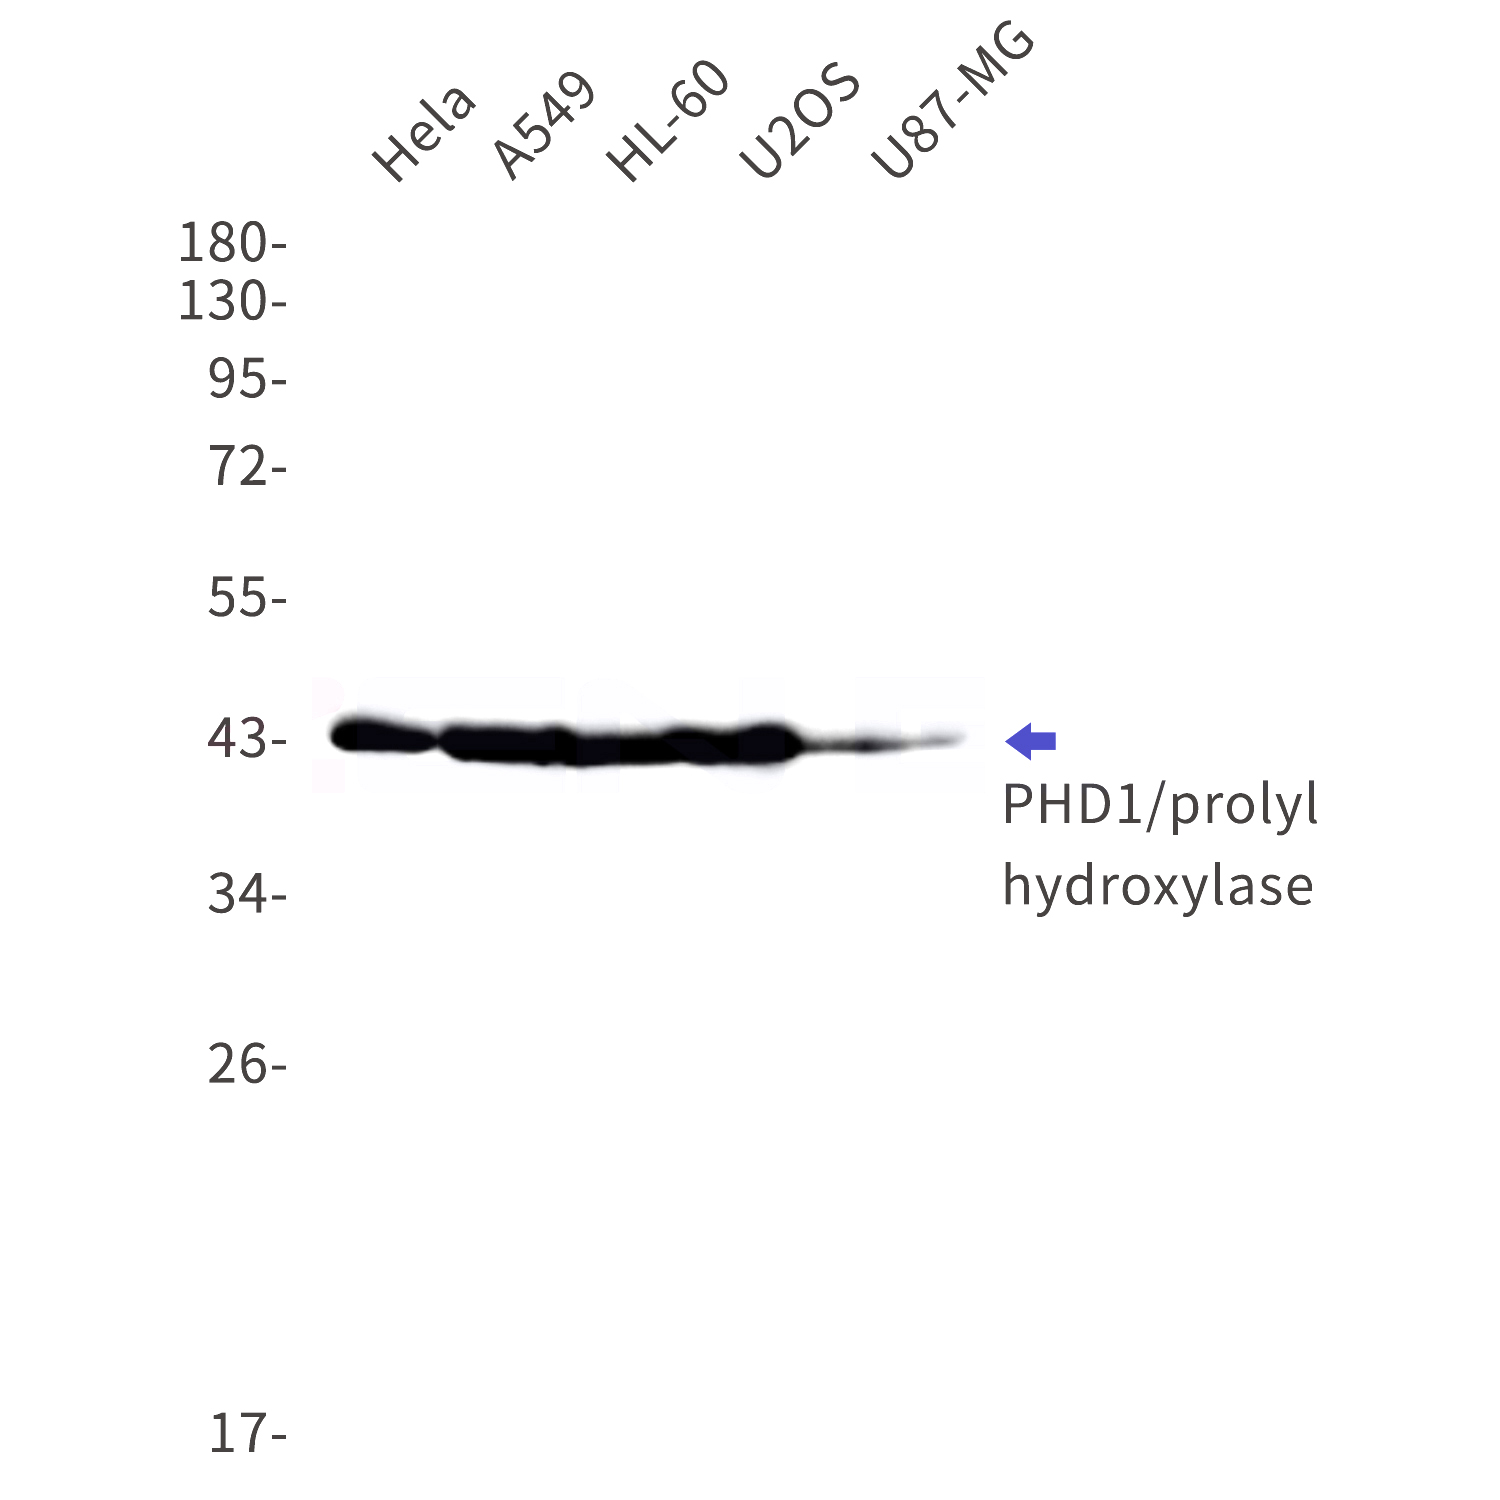 Western blot detection of PHD1/prolyl hydroxylase in Hela,A549,HL-60,U2OS,U87-MG cell lysates using PHD1/prolyl hydroxylase Rabbit mAb(1:1000 diluted).Observed band size:44kDa.